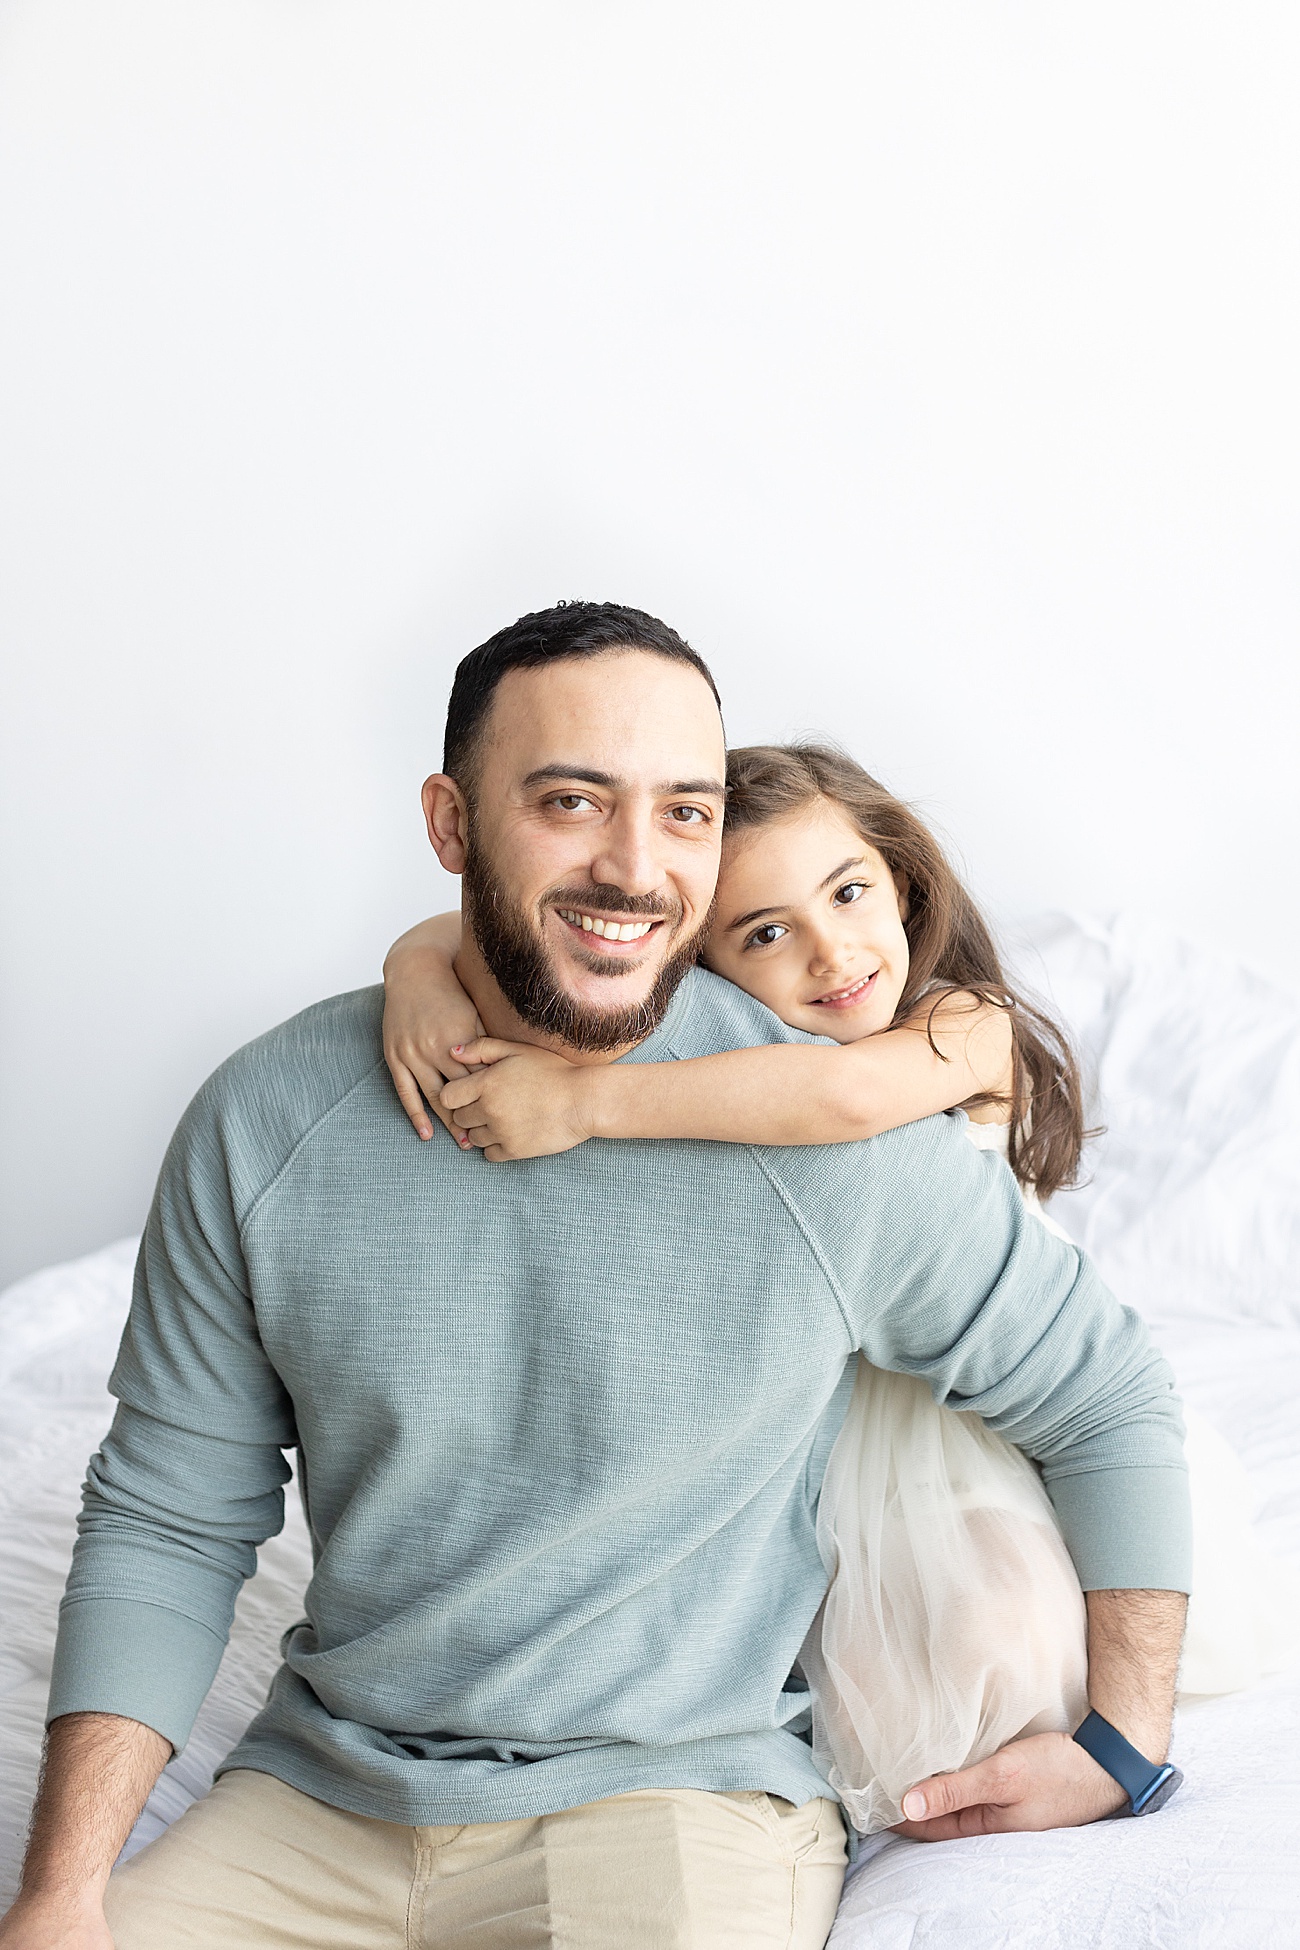 Dad and daughter smiling at the camera during photoshoot in Austin, TX. Photo by Sana Ahmed Photography.